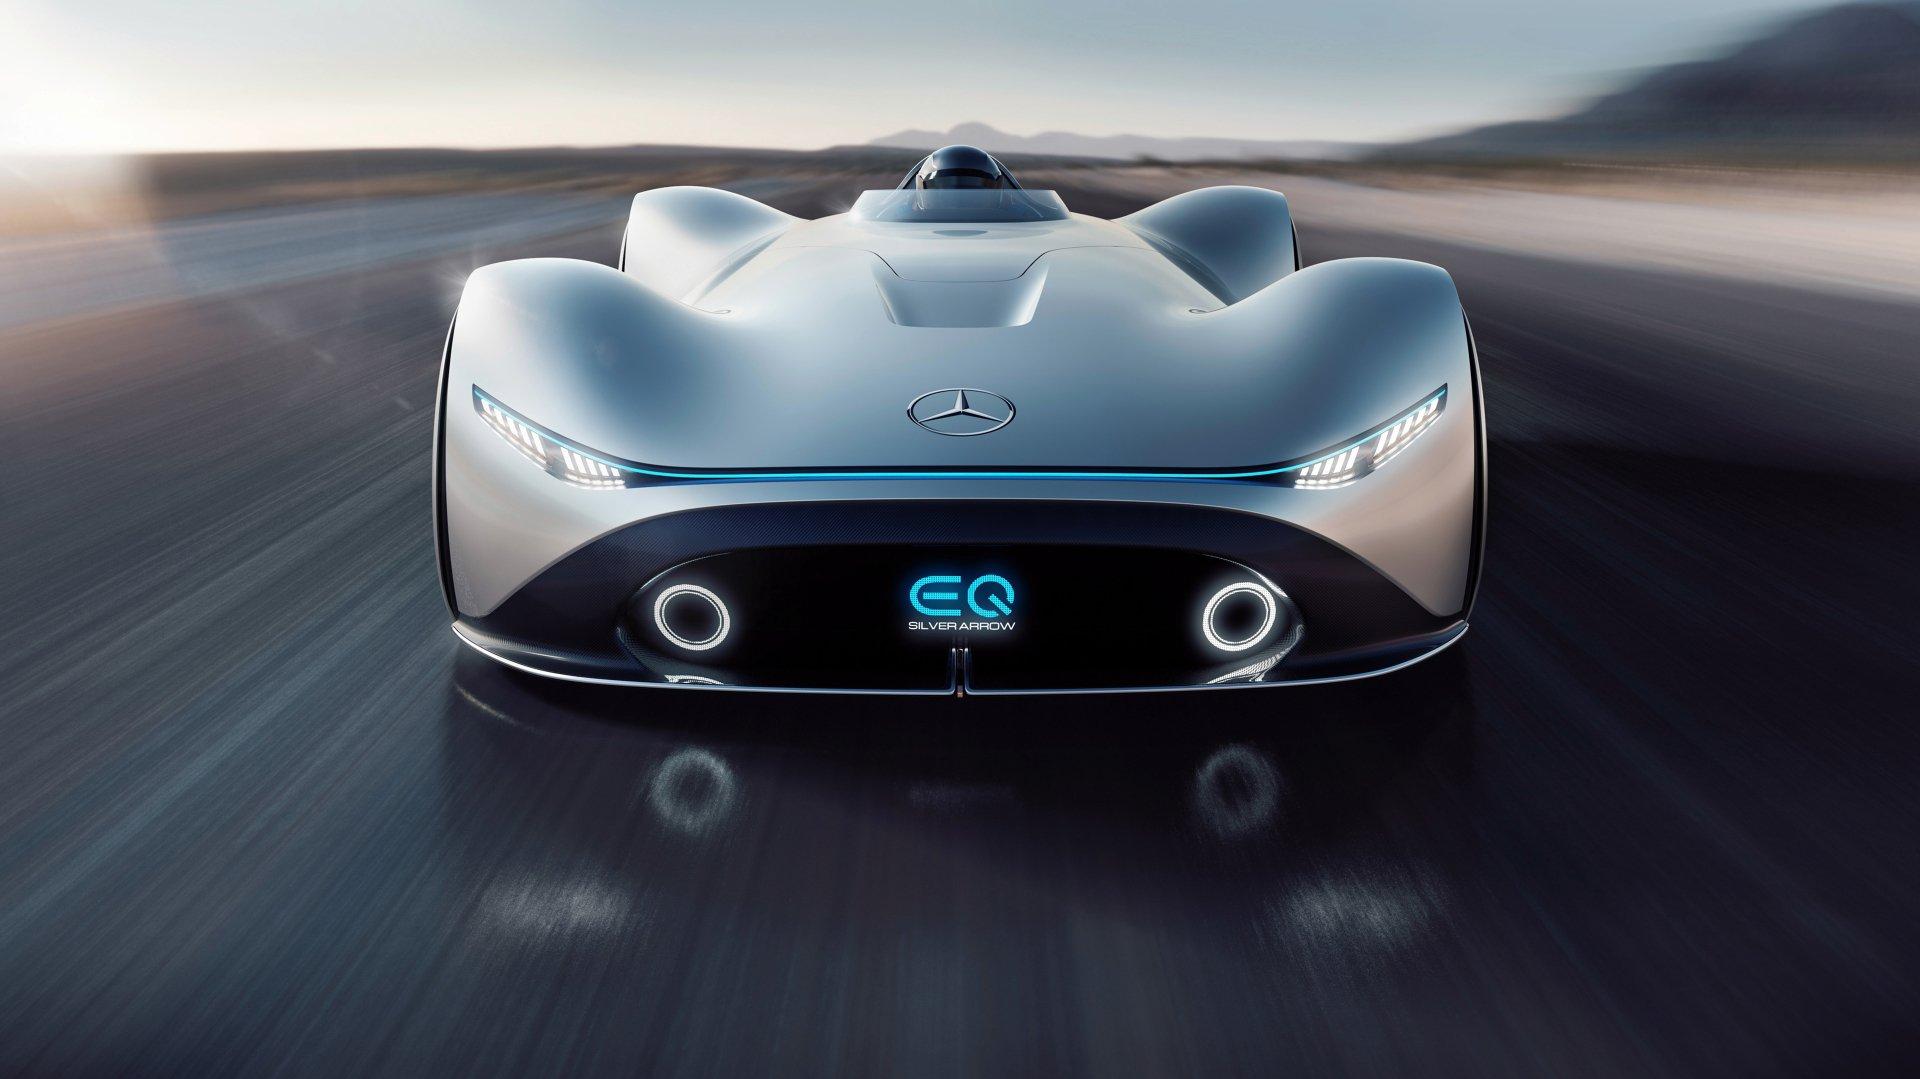 Mercedes Benz Vision Eqs HD Wallpaper And Background